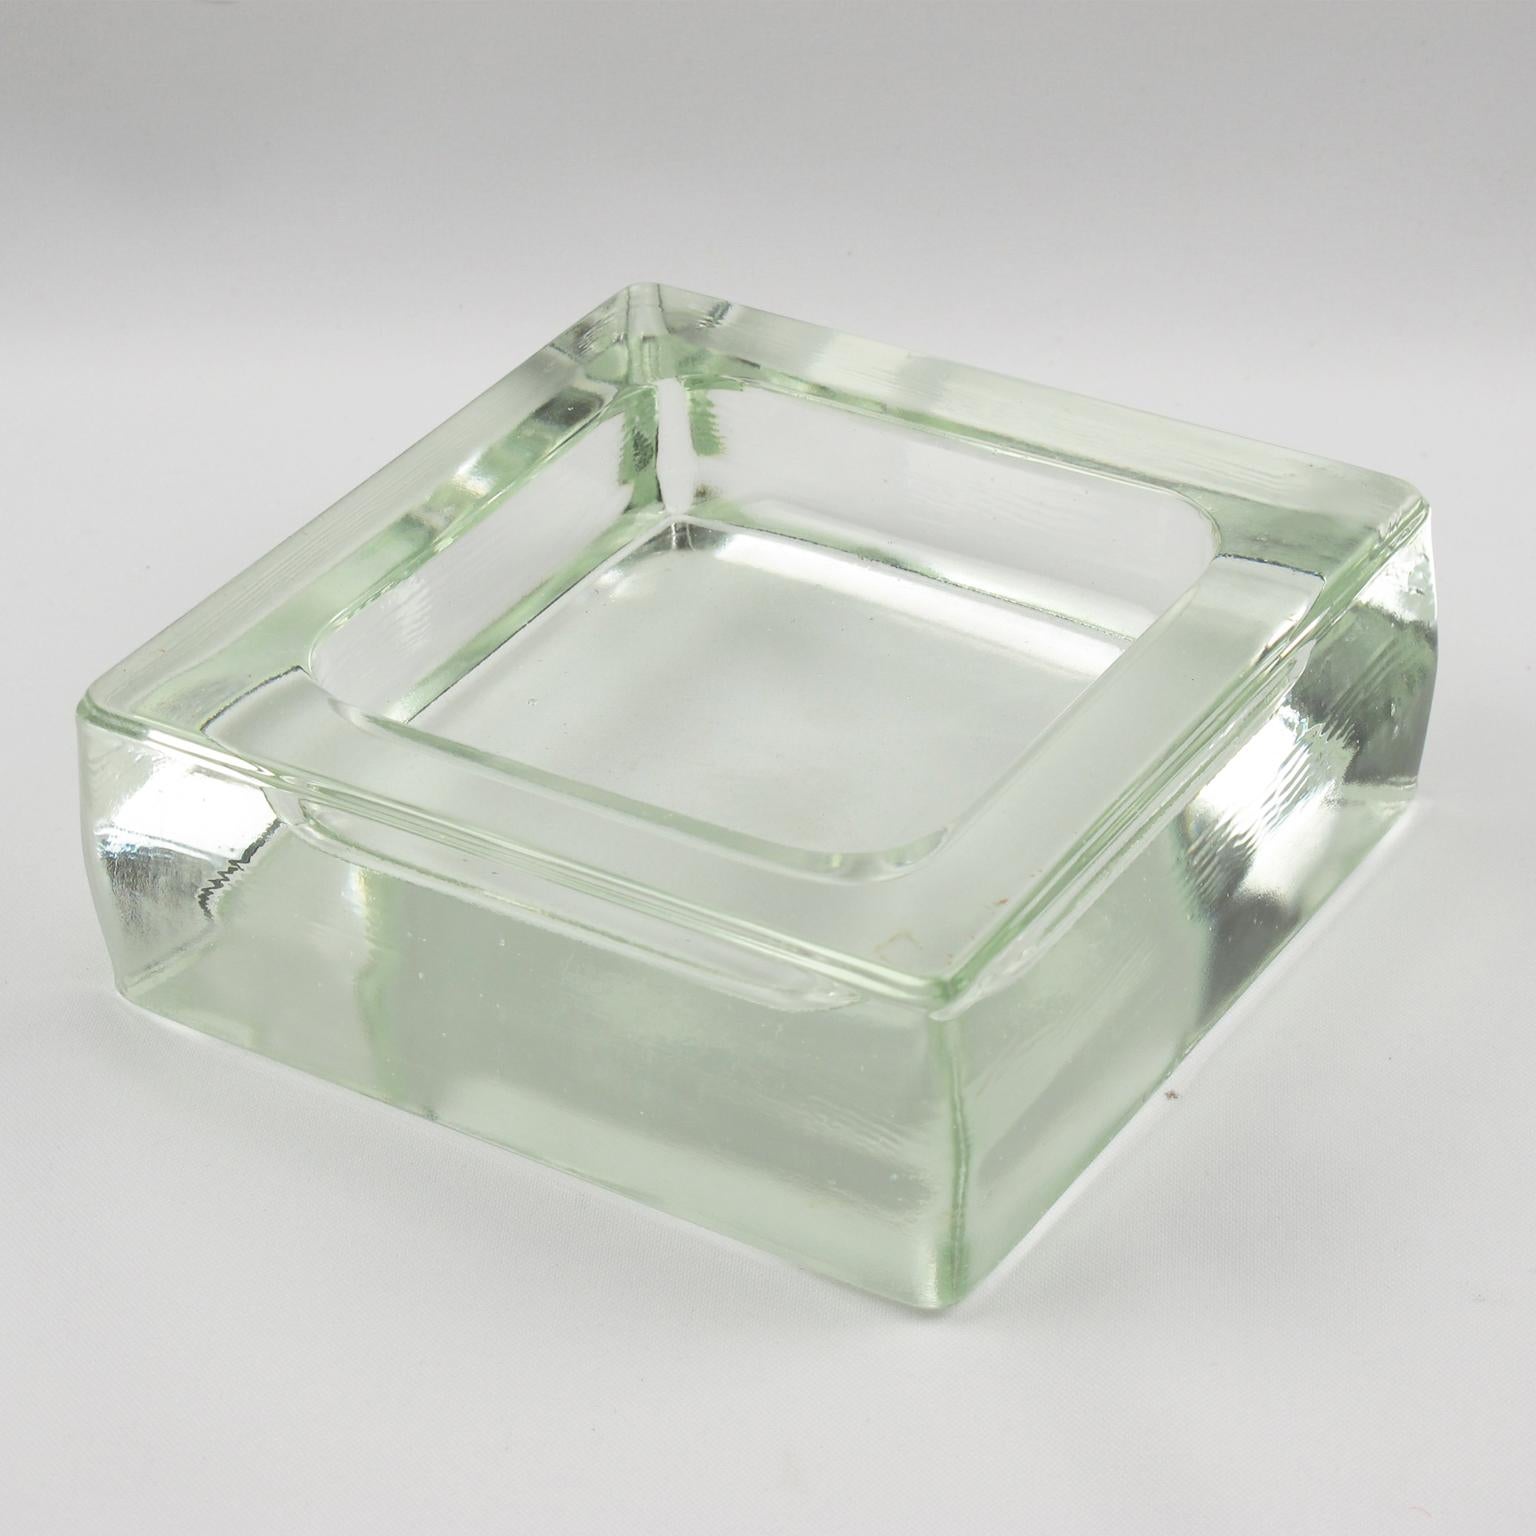 Industrial thick molded glass desktop accessory, desk tidy, cigar ashtray or catchall, manufactured by Lumax, France. Original design by Le Corbusier. No visible marking.
Measurements: 5.50 in. wide (14 cm) x 5.50 in. deep (14 cm) x 2 in. high (5